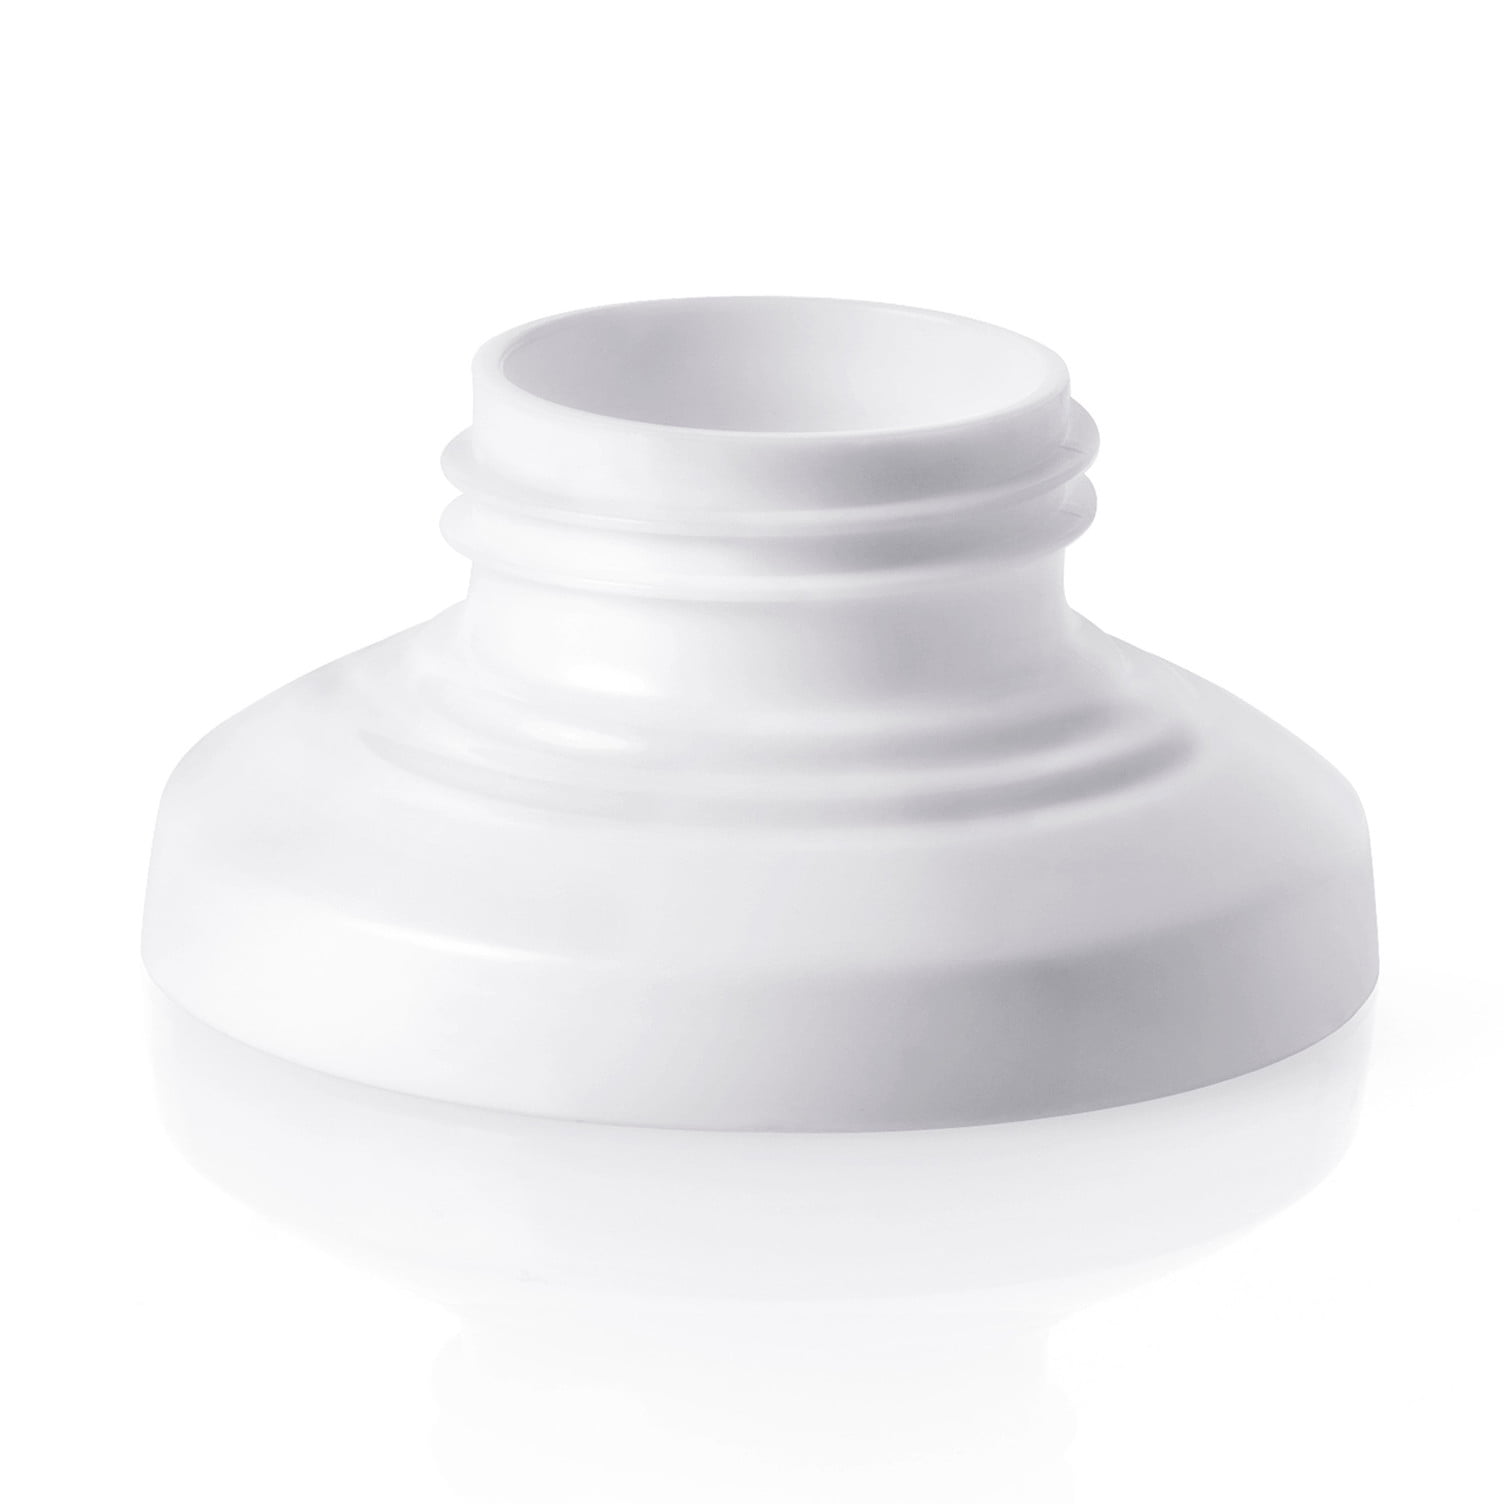 Tommee Tippee Closer to Nature Pump and Bottle - Walmart.com